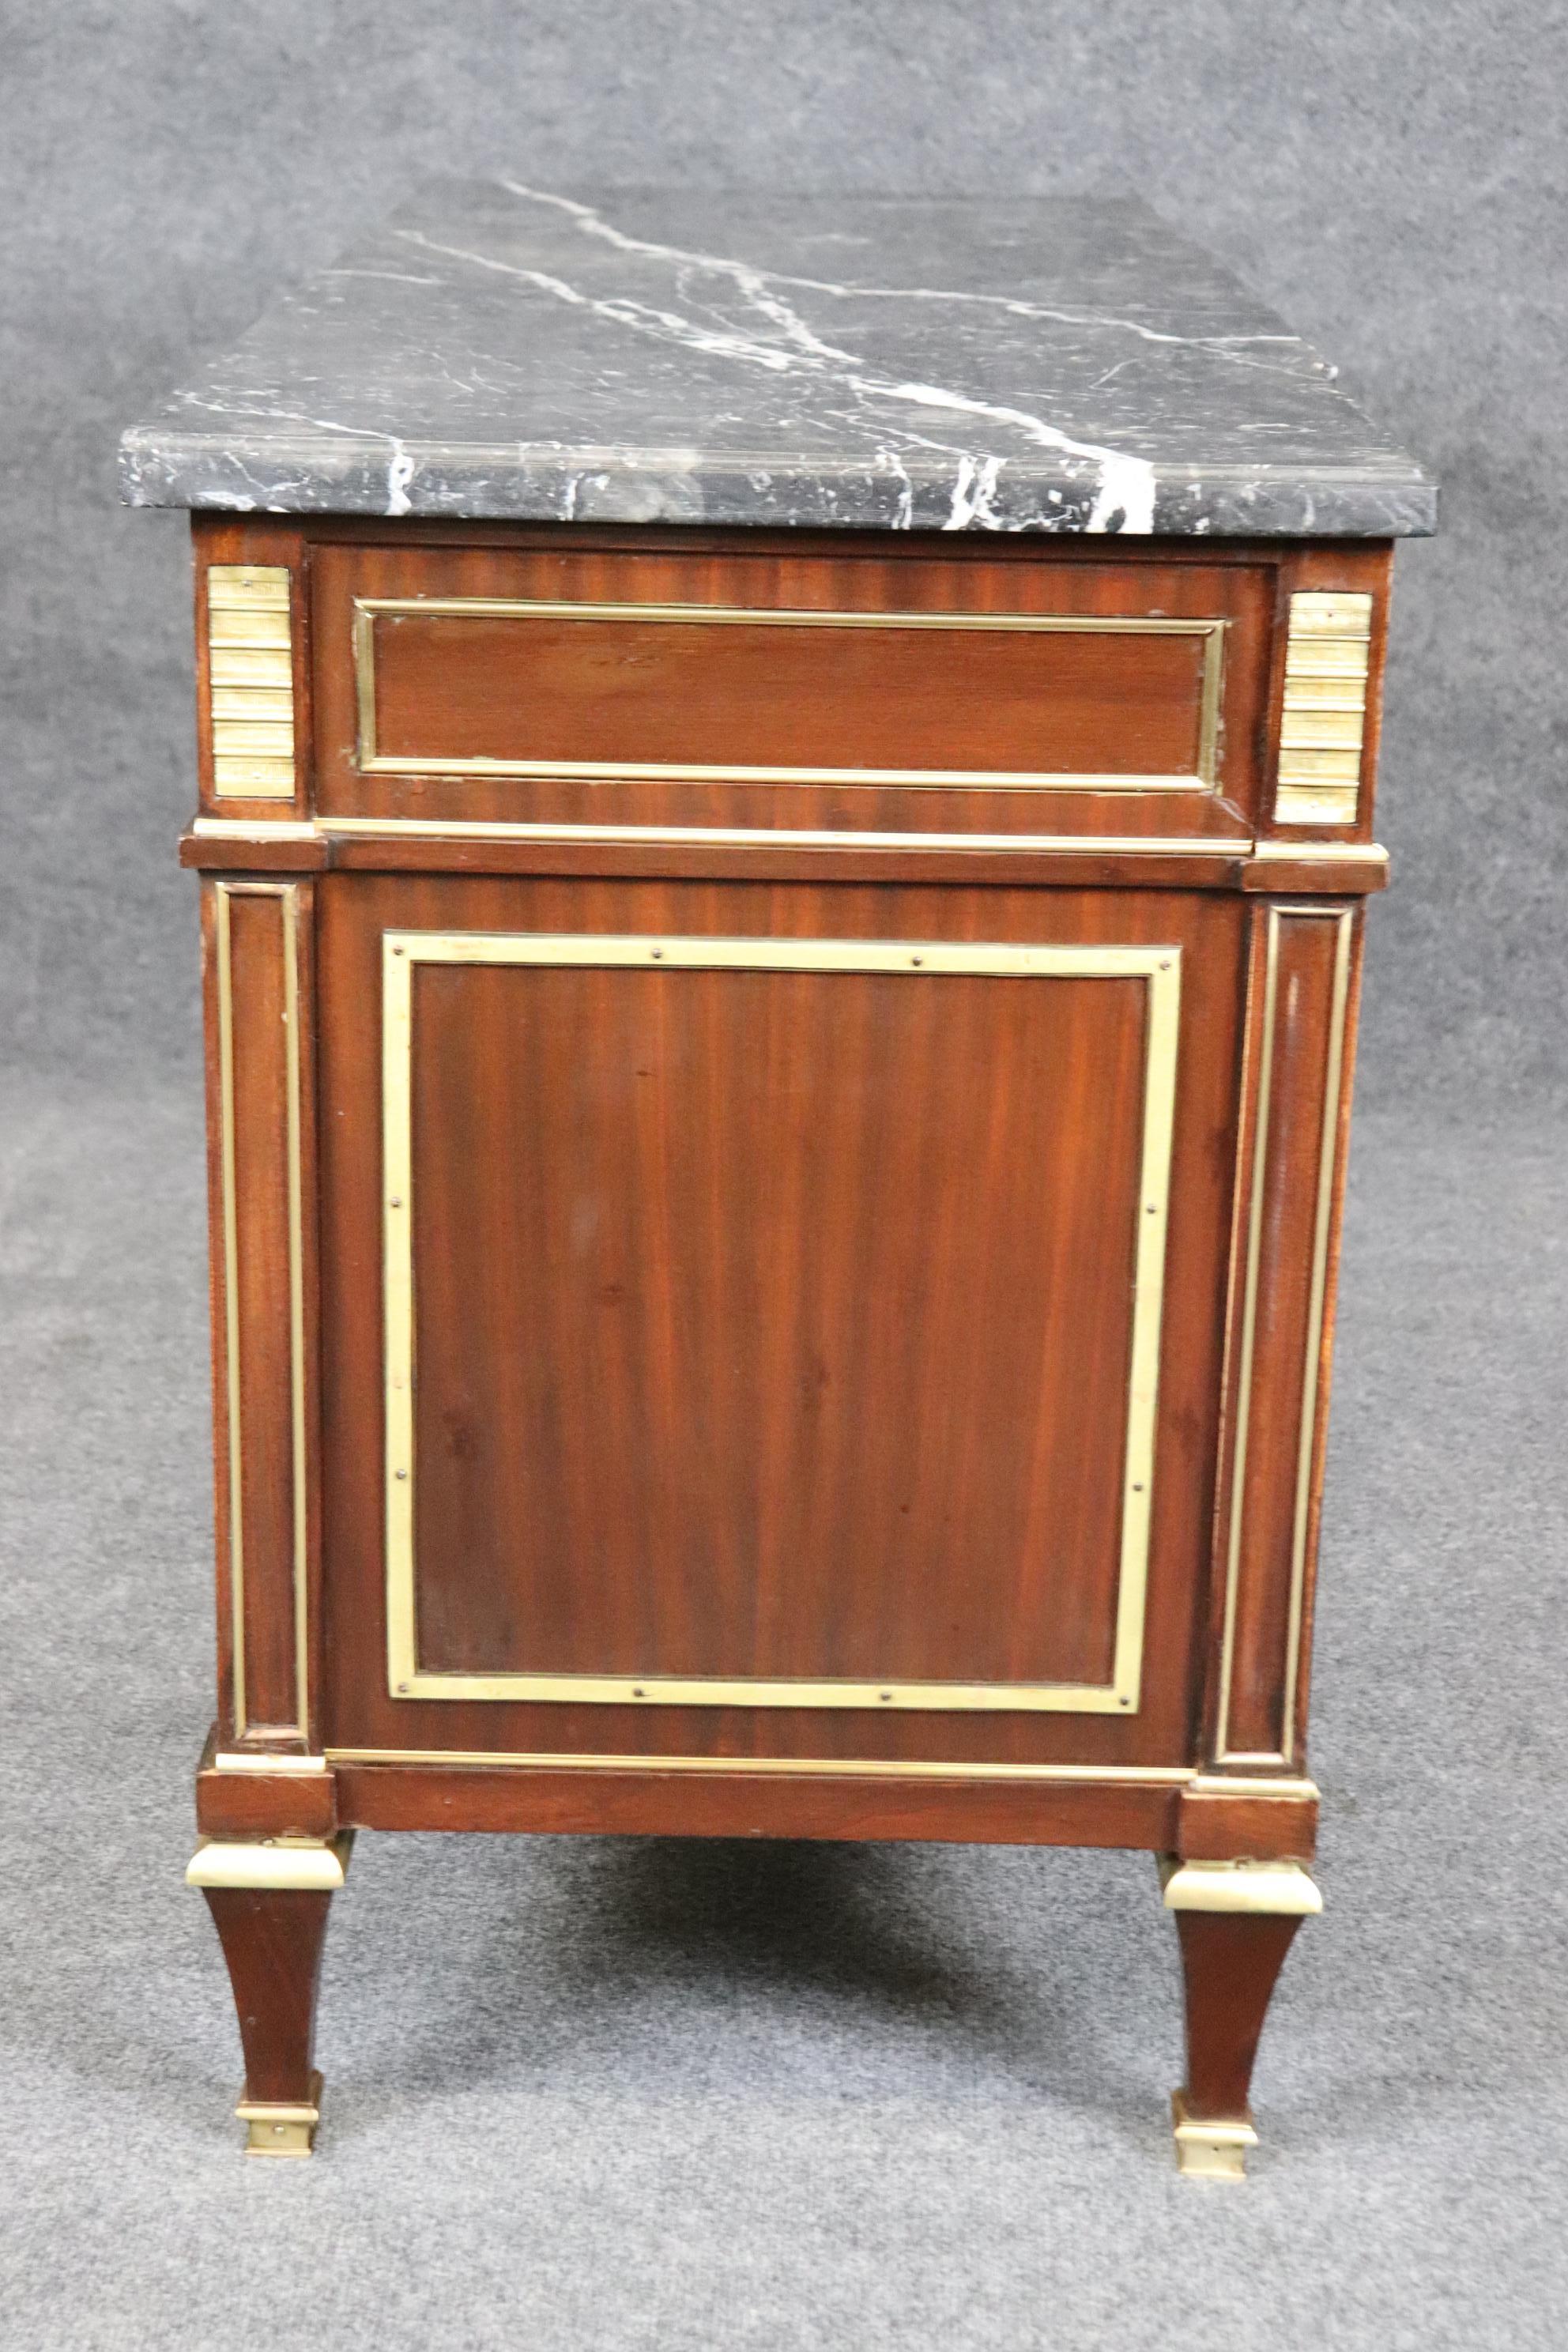 This is a quintessential signed Maison Jansen bronze mounted marble top commode or dresser. The look, design and overal proportions make this easily the prettiest commode online today. The condition is original with gorgeous bronze and ring pulls.